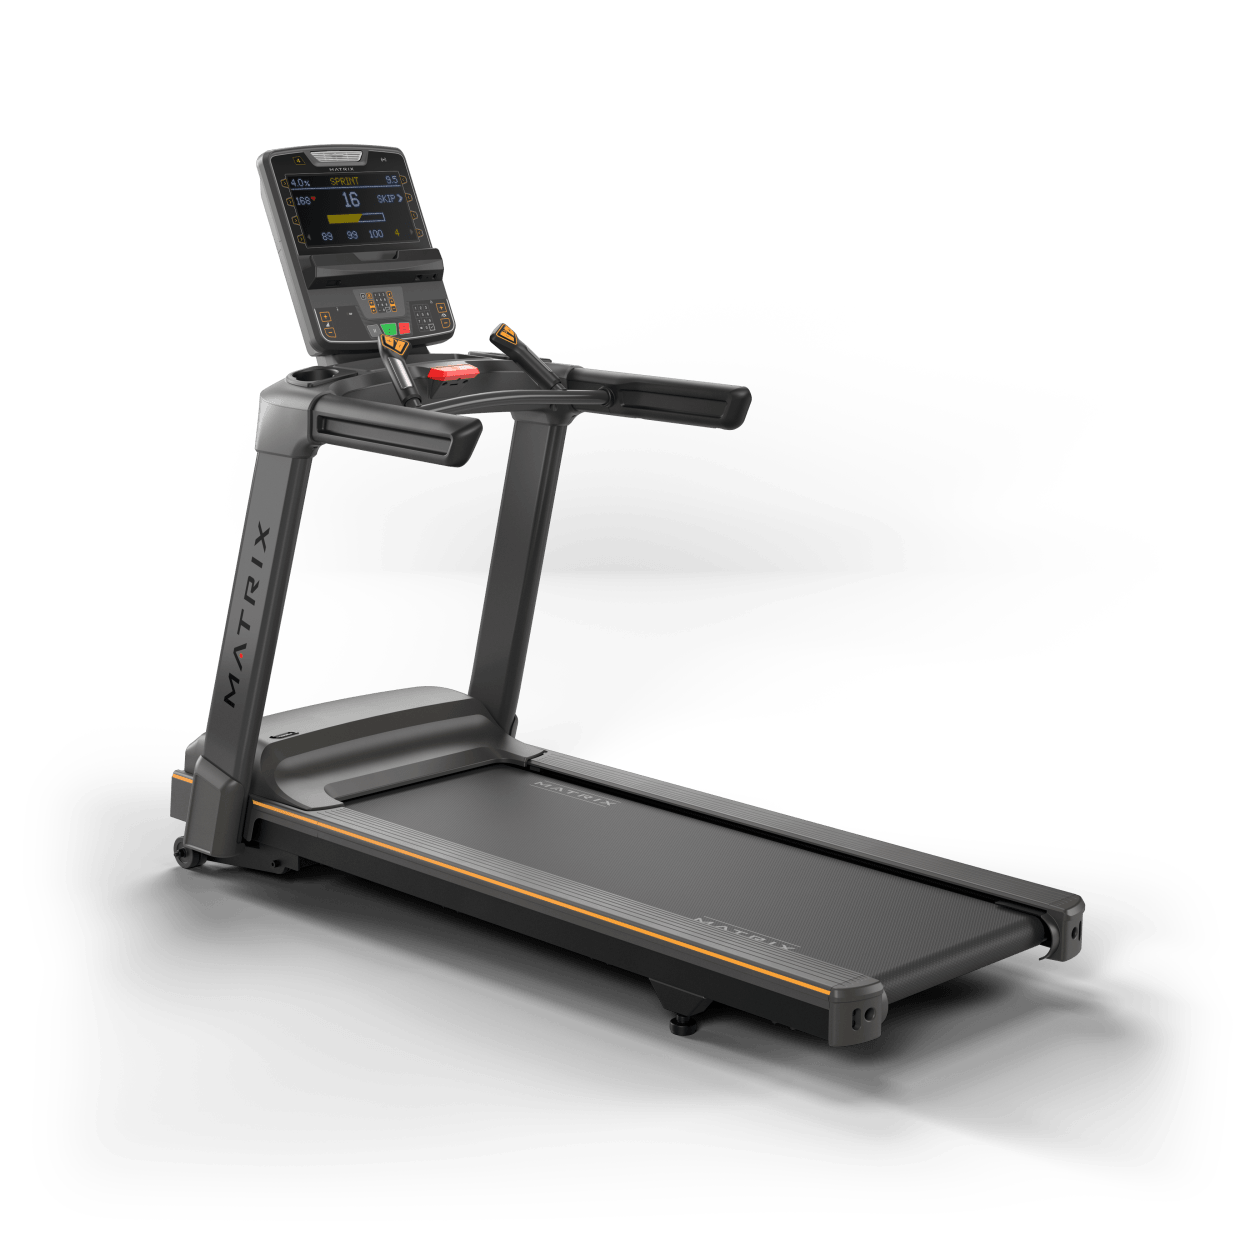 Matrix Fitness Lifetstyle Treadmill with Premium LED Console front view | Fitness Experience